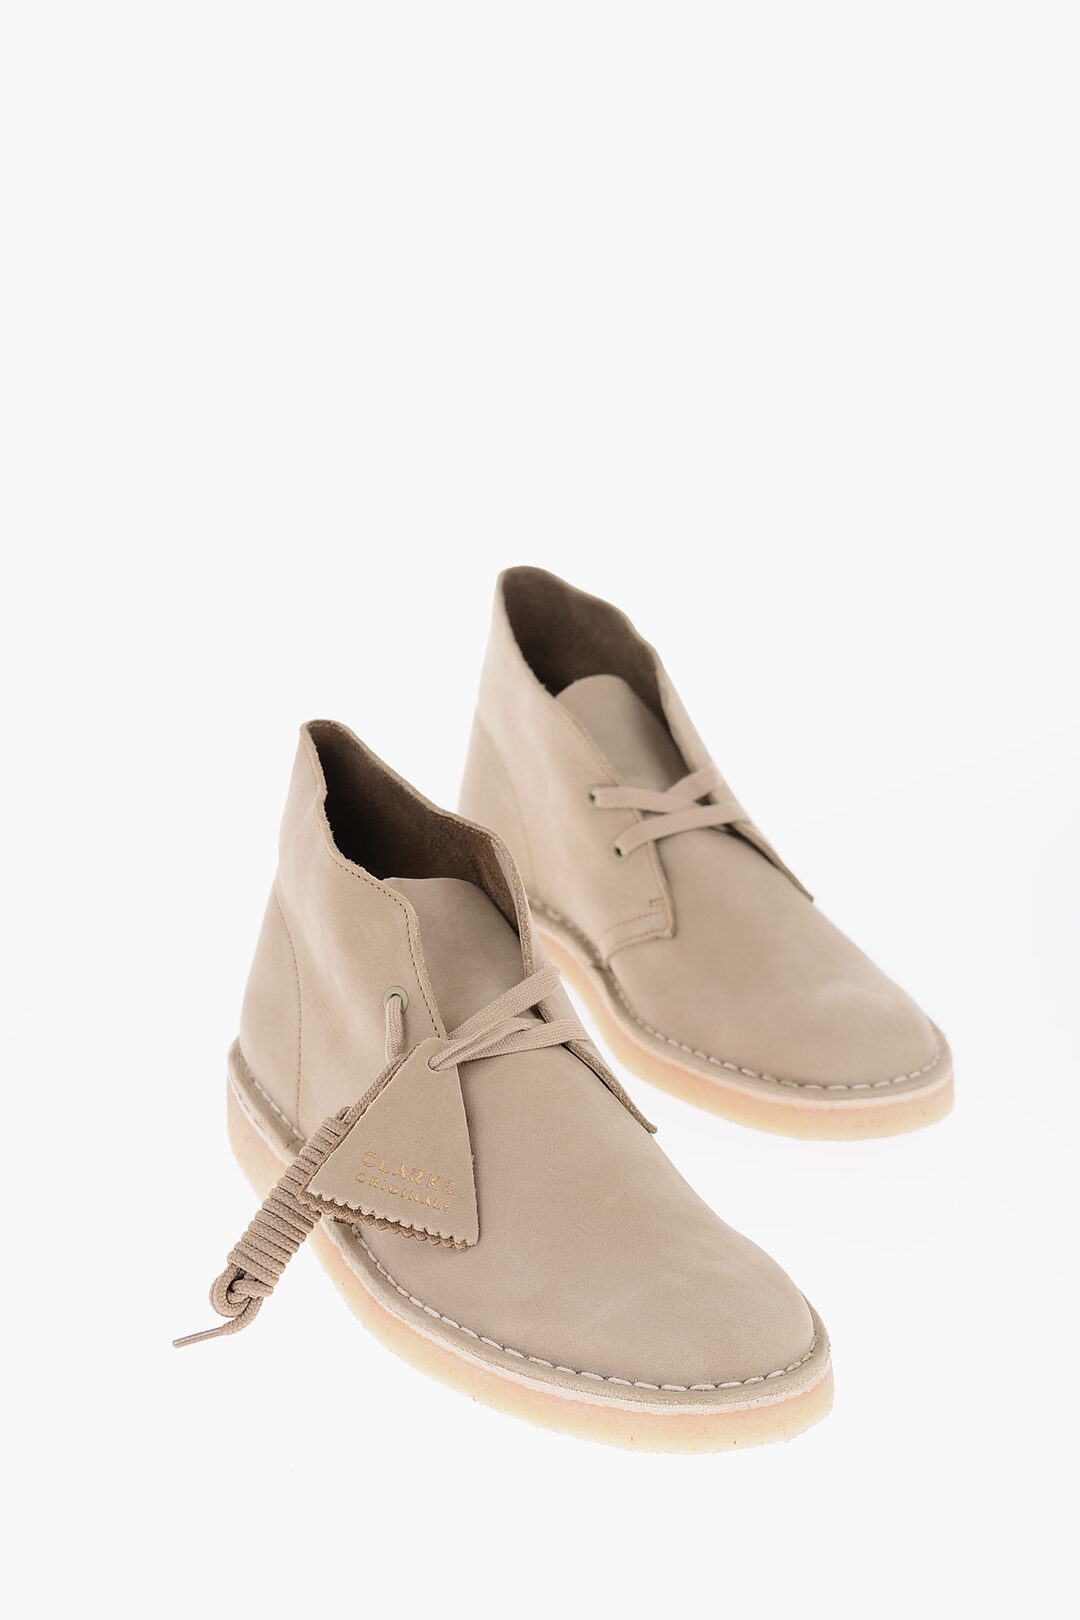 Clarks Leather Desert Boots with Crepe Sole - Glamood Outlet